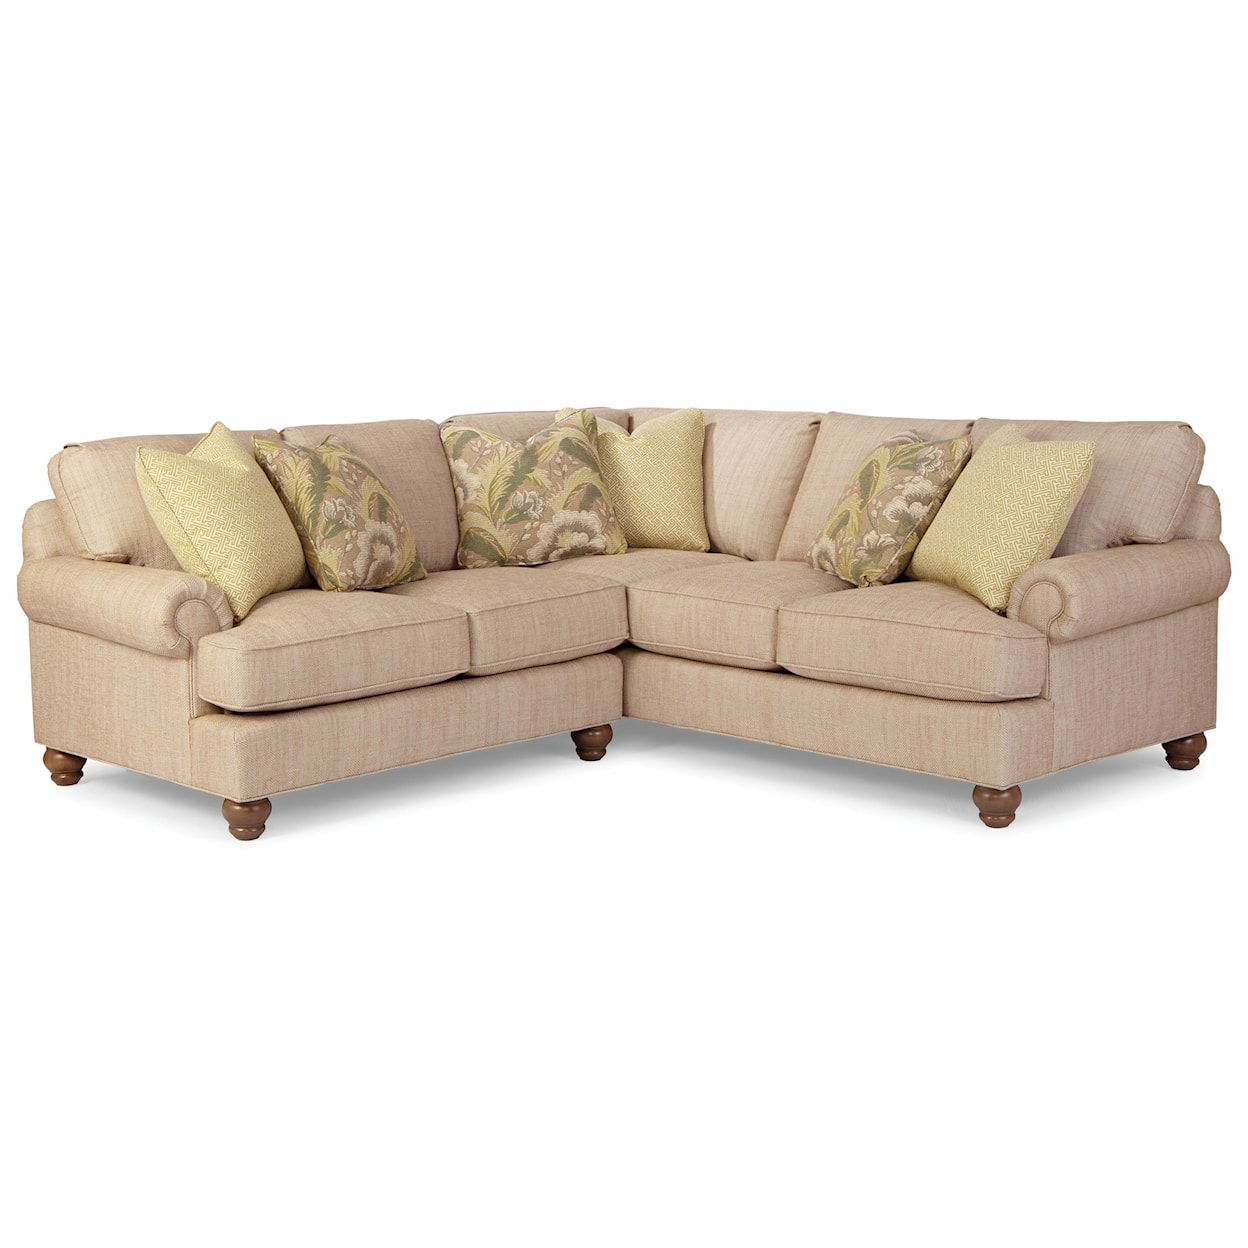 PD Cottage by Craftmaster P9 Custom Upholstery Customizable 2 Pc Sectional Sofa w/ LAF Love